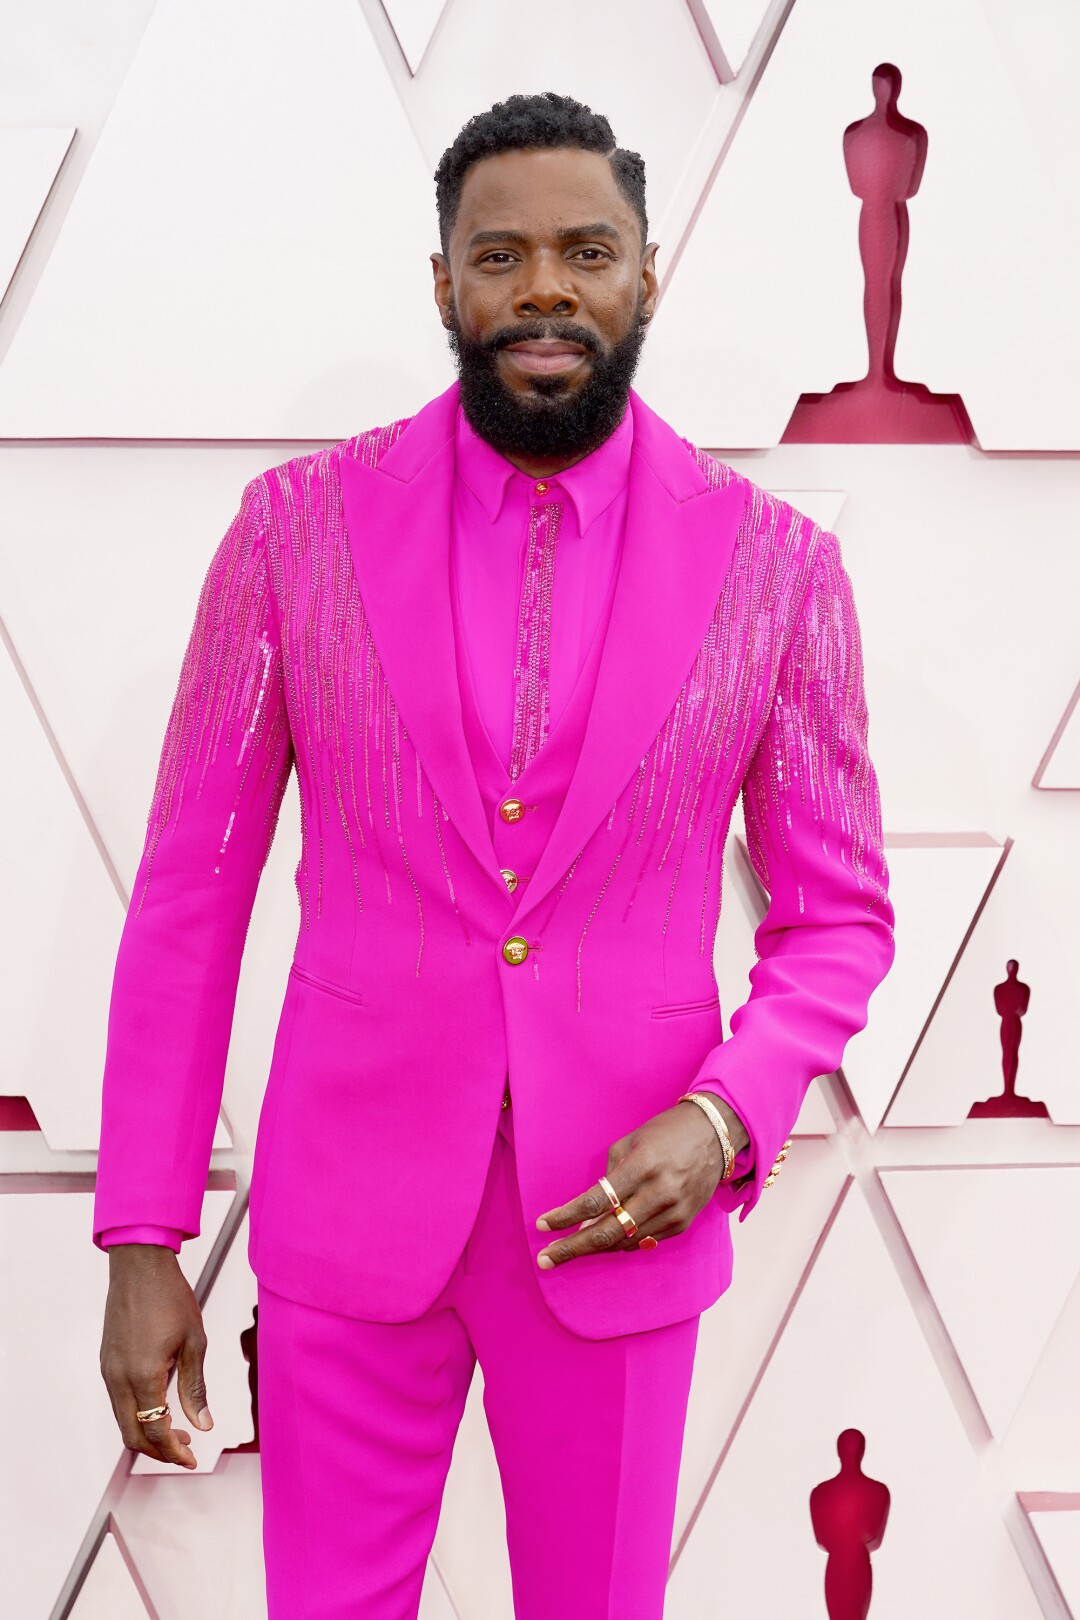 Colman Domingo arrives at the Oscars in a bright dark pink suit and shirt.